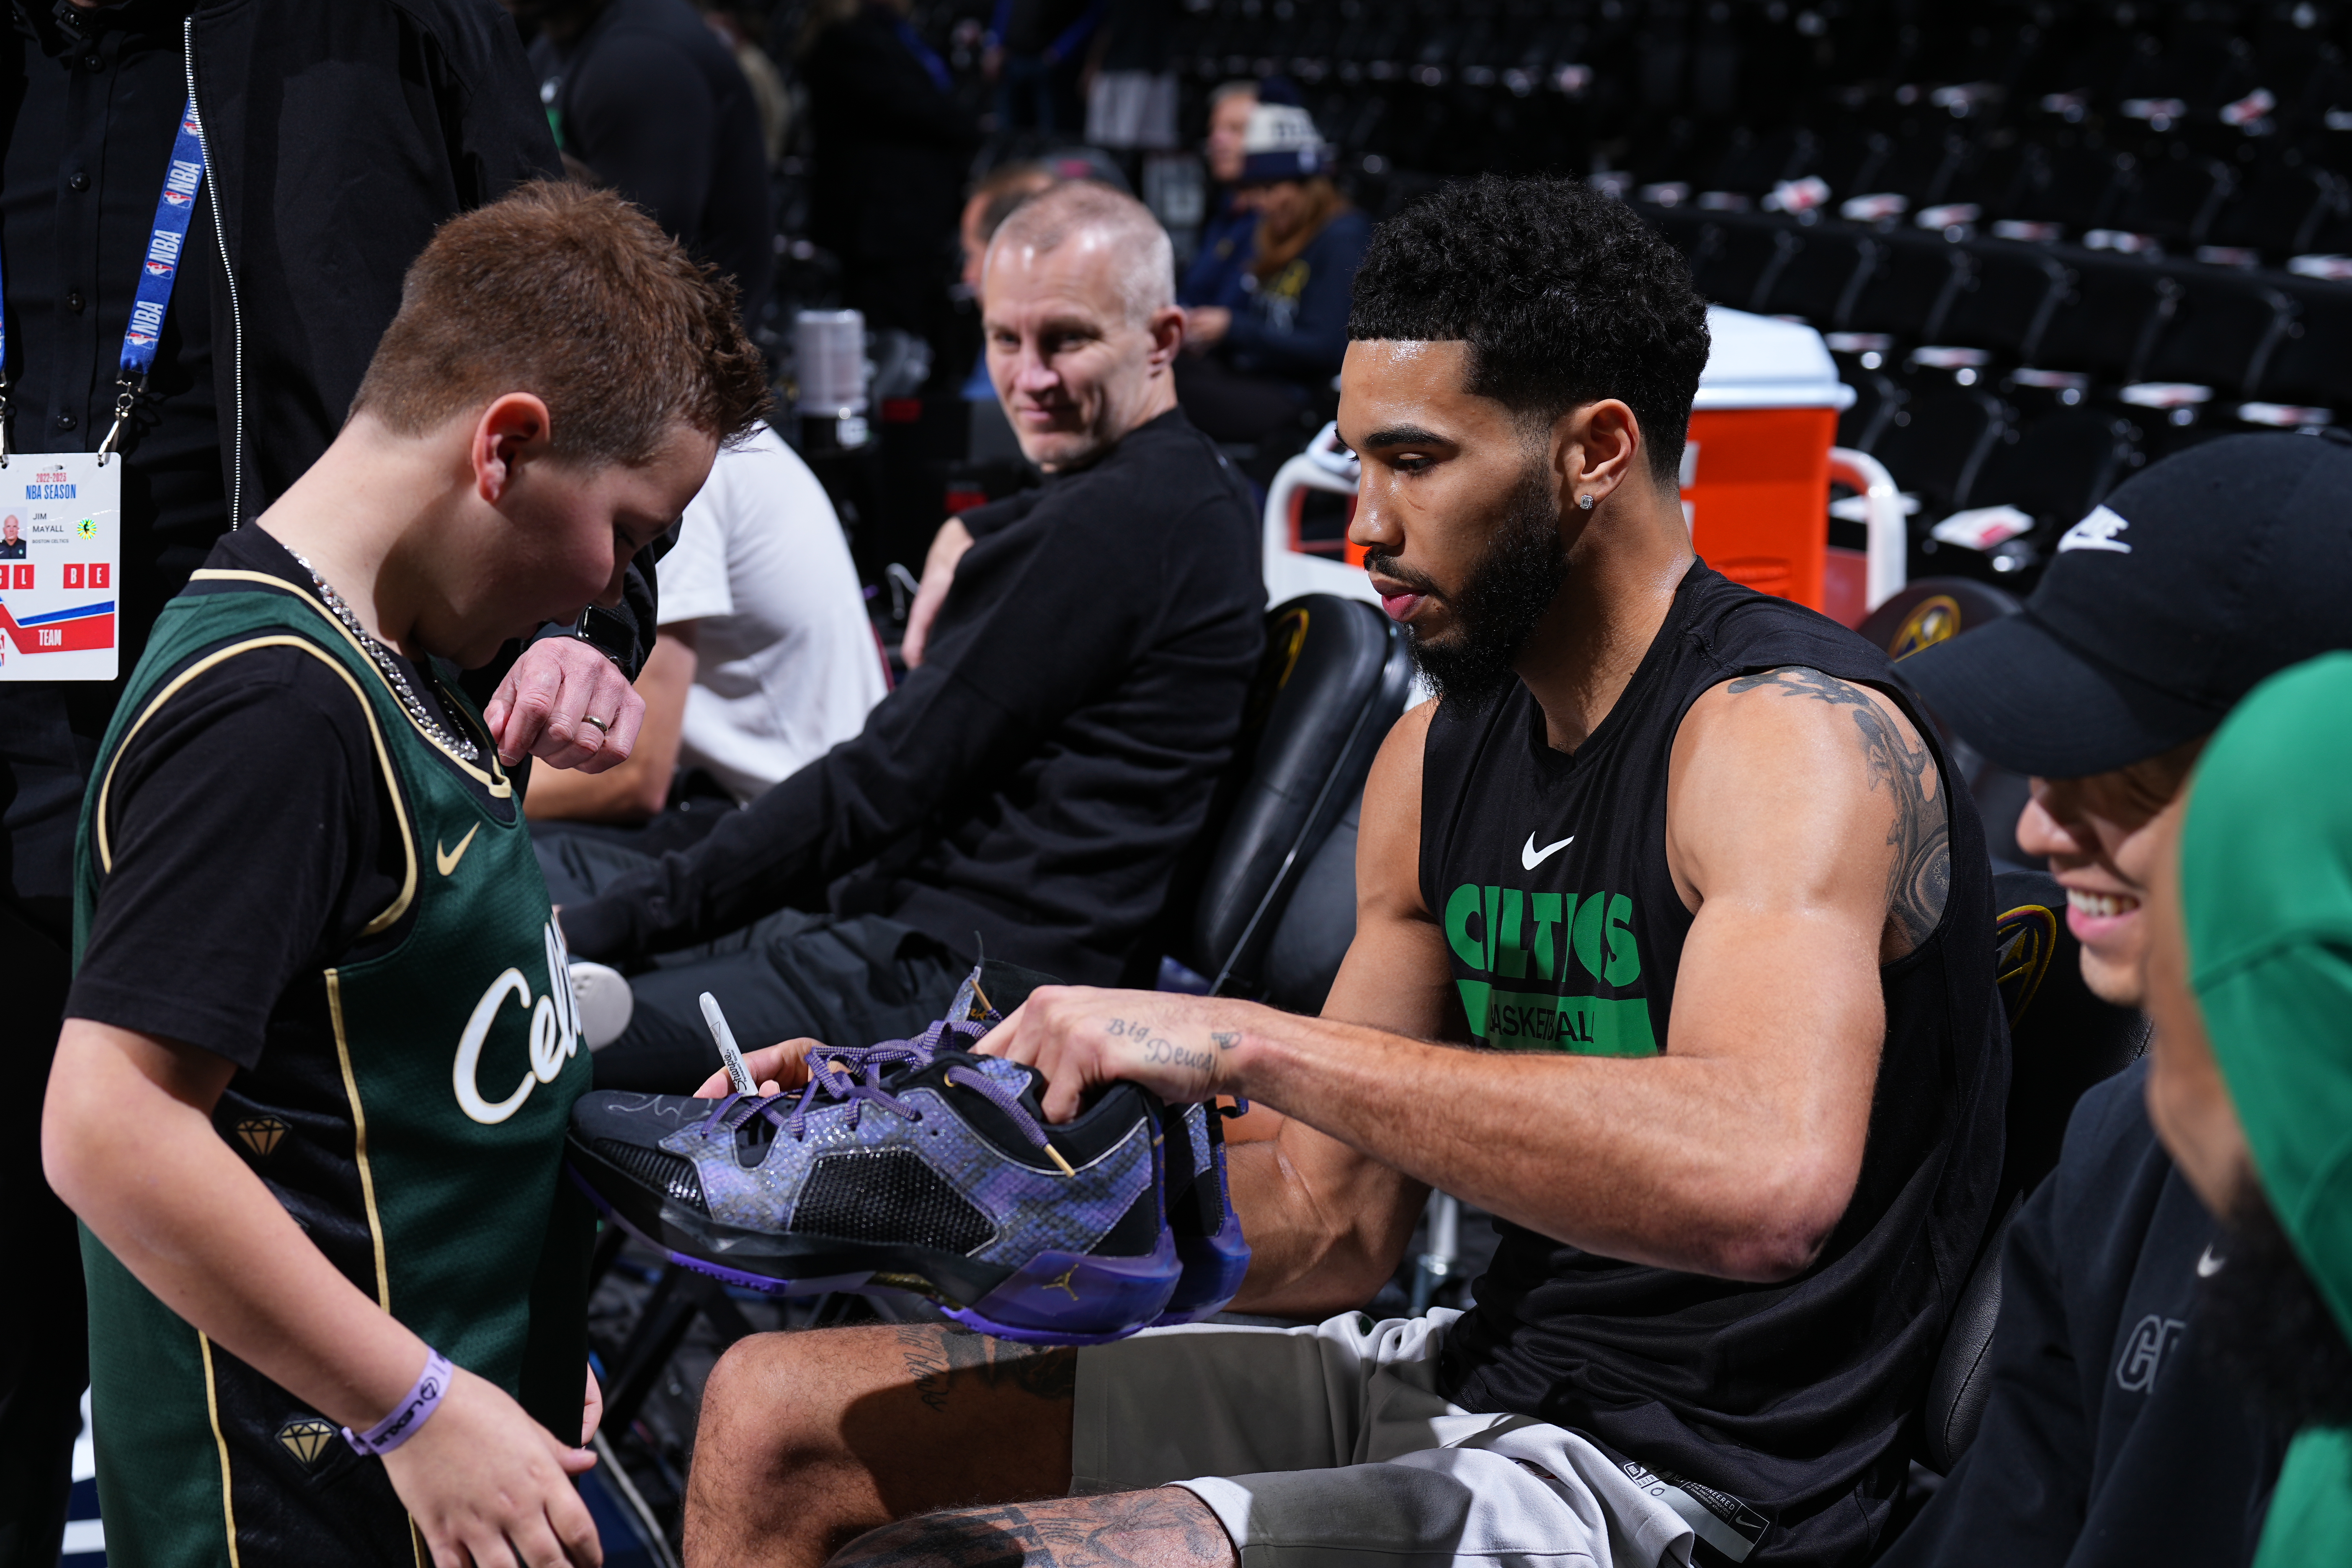 Tatum gifts a pair of his shoes to a Celtics fan